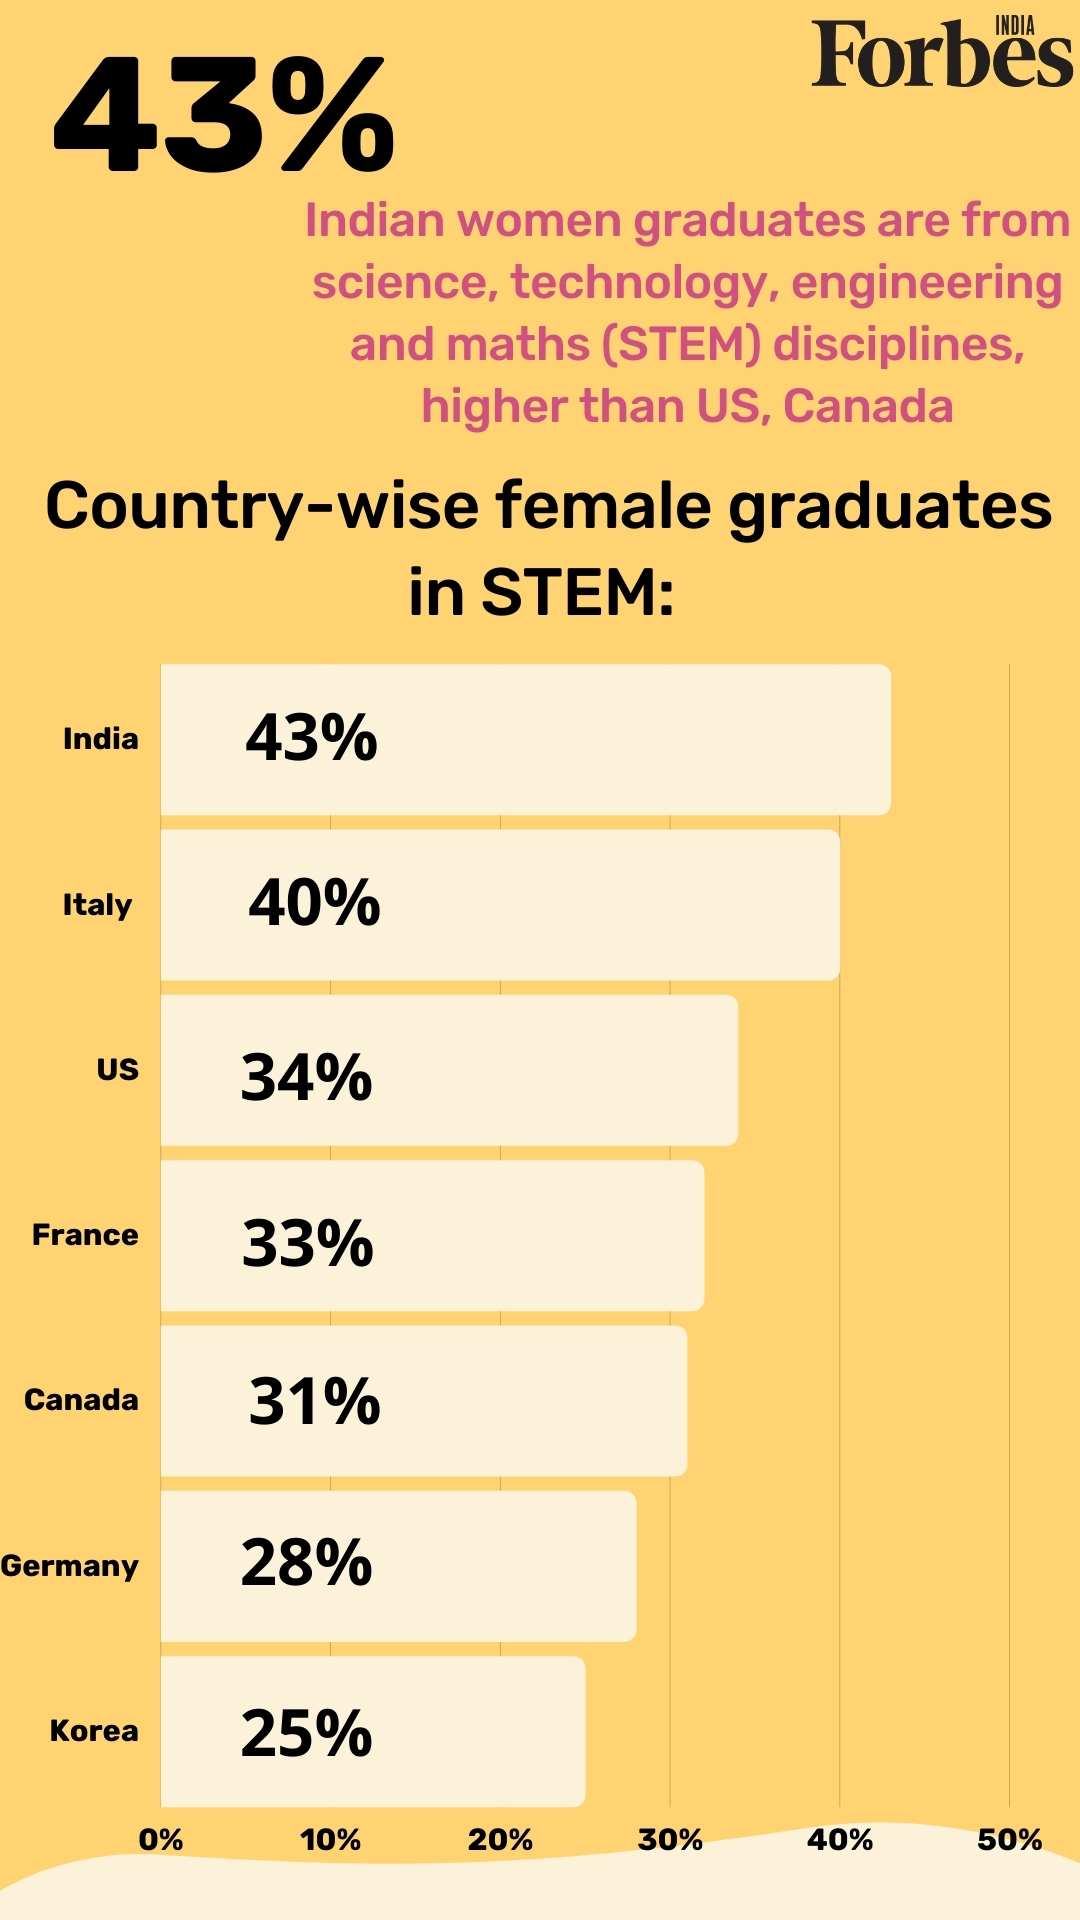 43% Indian women are STEM grads but only 14% are employed as scientists, engineers